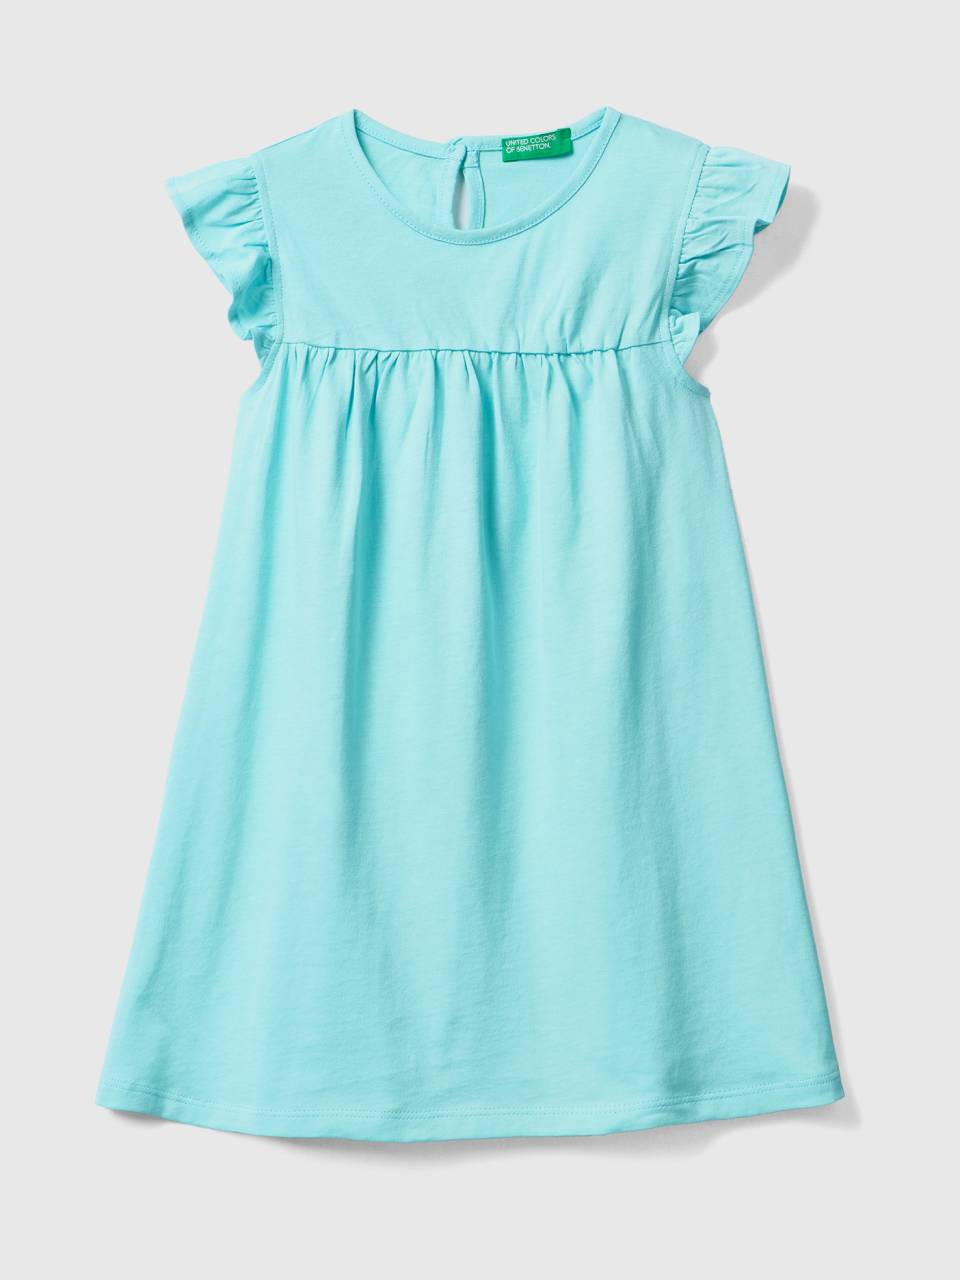 Benetton dress with cap sleeves. 1